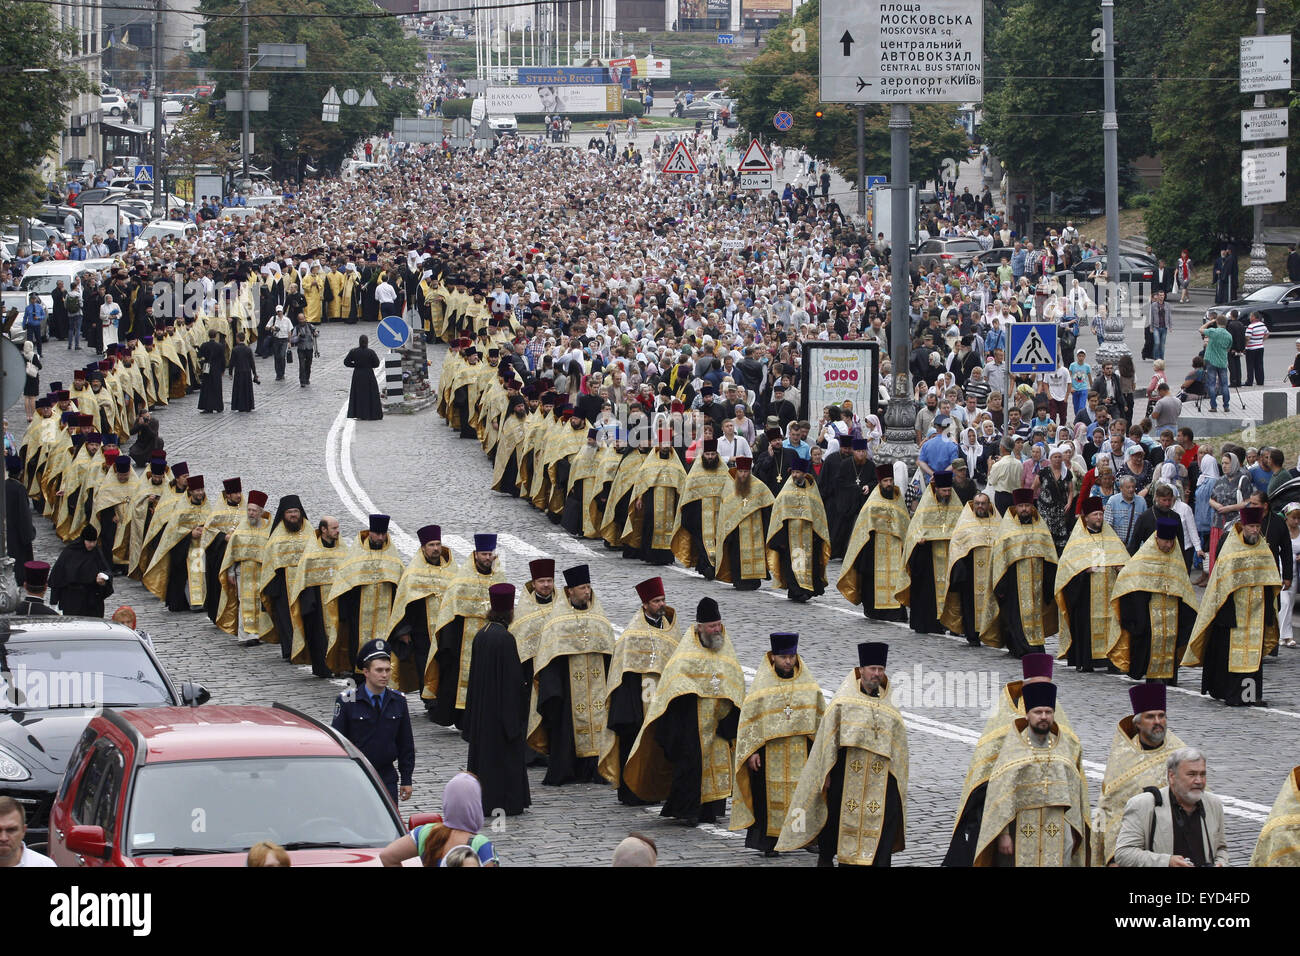 Kiev, Ukraine. 27th July, 2015. Believers and priests from the Ukrainian Orthodox Church of Moscow Patriarchate take a part in religious procession marking the 1000th anniversary of the Repose of Vladimir the Great at St. Vladimirs Hill in Kiev, Ukraine, 27 July 2015. The Grand Prince of Kiev, Vladimir the Great, also known as St. Vladimir, Vladimir the Baptizer of Rus and Vladimir the Red Sun, was the first Christian ruler in the Kievan Rus who christianized the region. Orthodox believers will mark the 1027th anniversary of Kievan Rus Christianization on 28 July. (Credit Image: © Serg Glovny Stock Photo